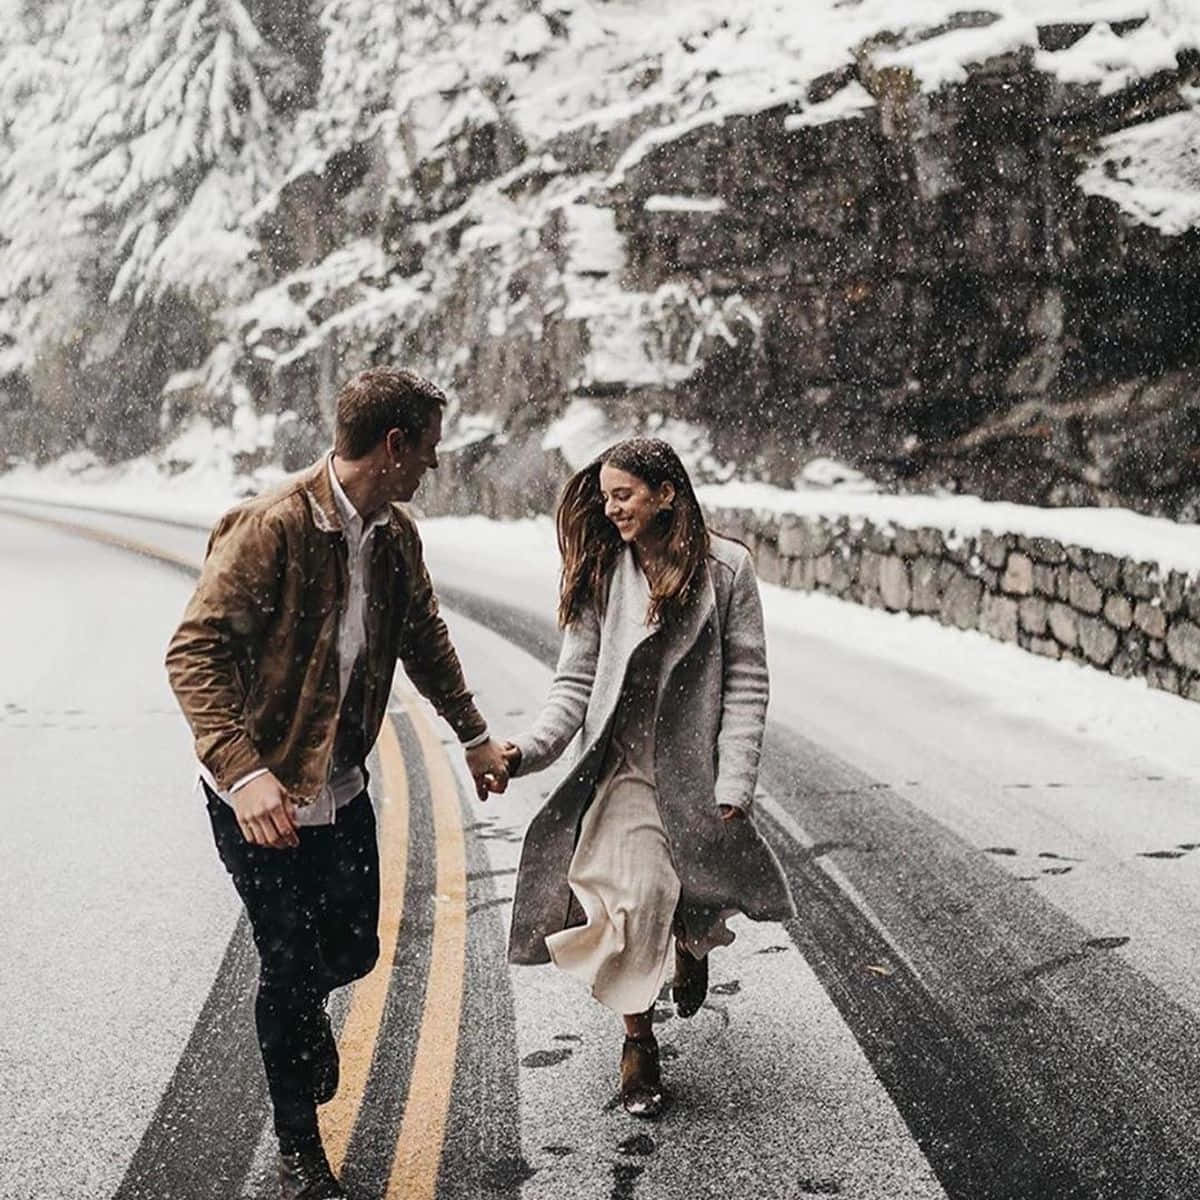 Cute Relationship Running On Snowy Road Picture